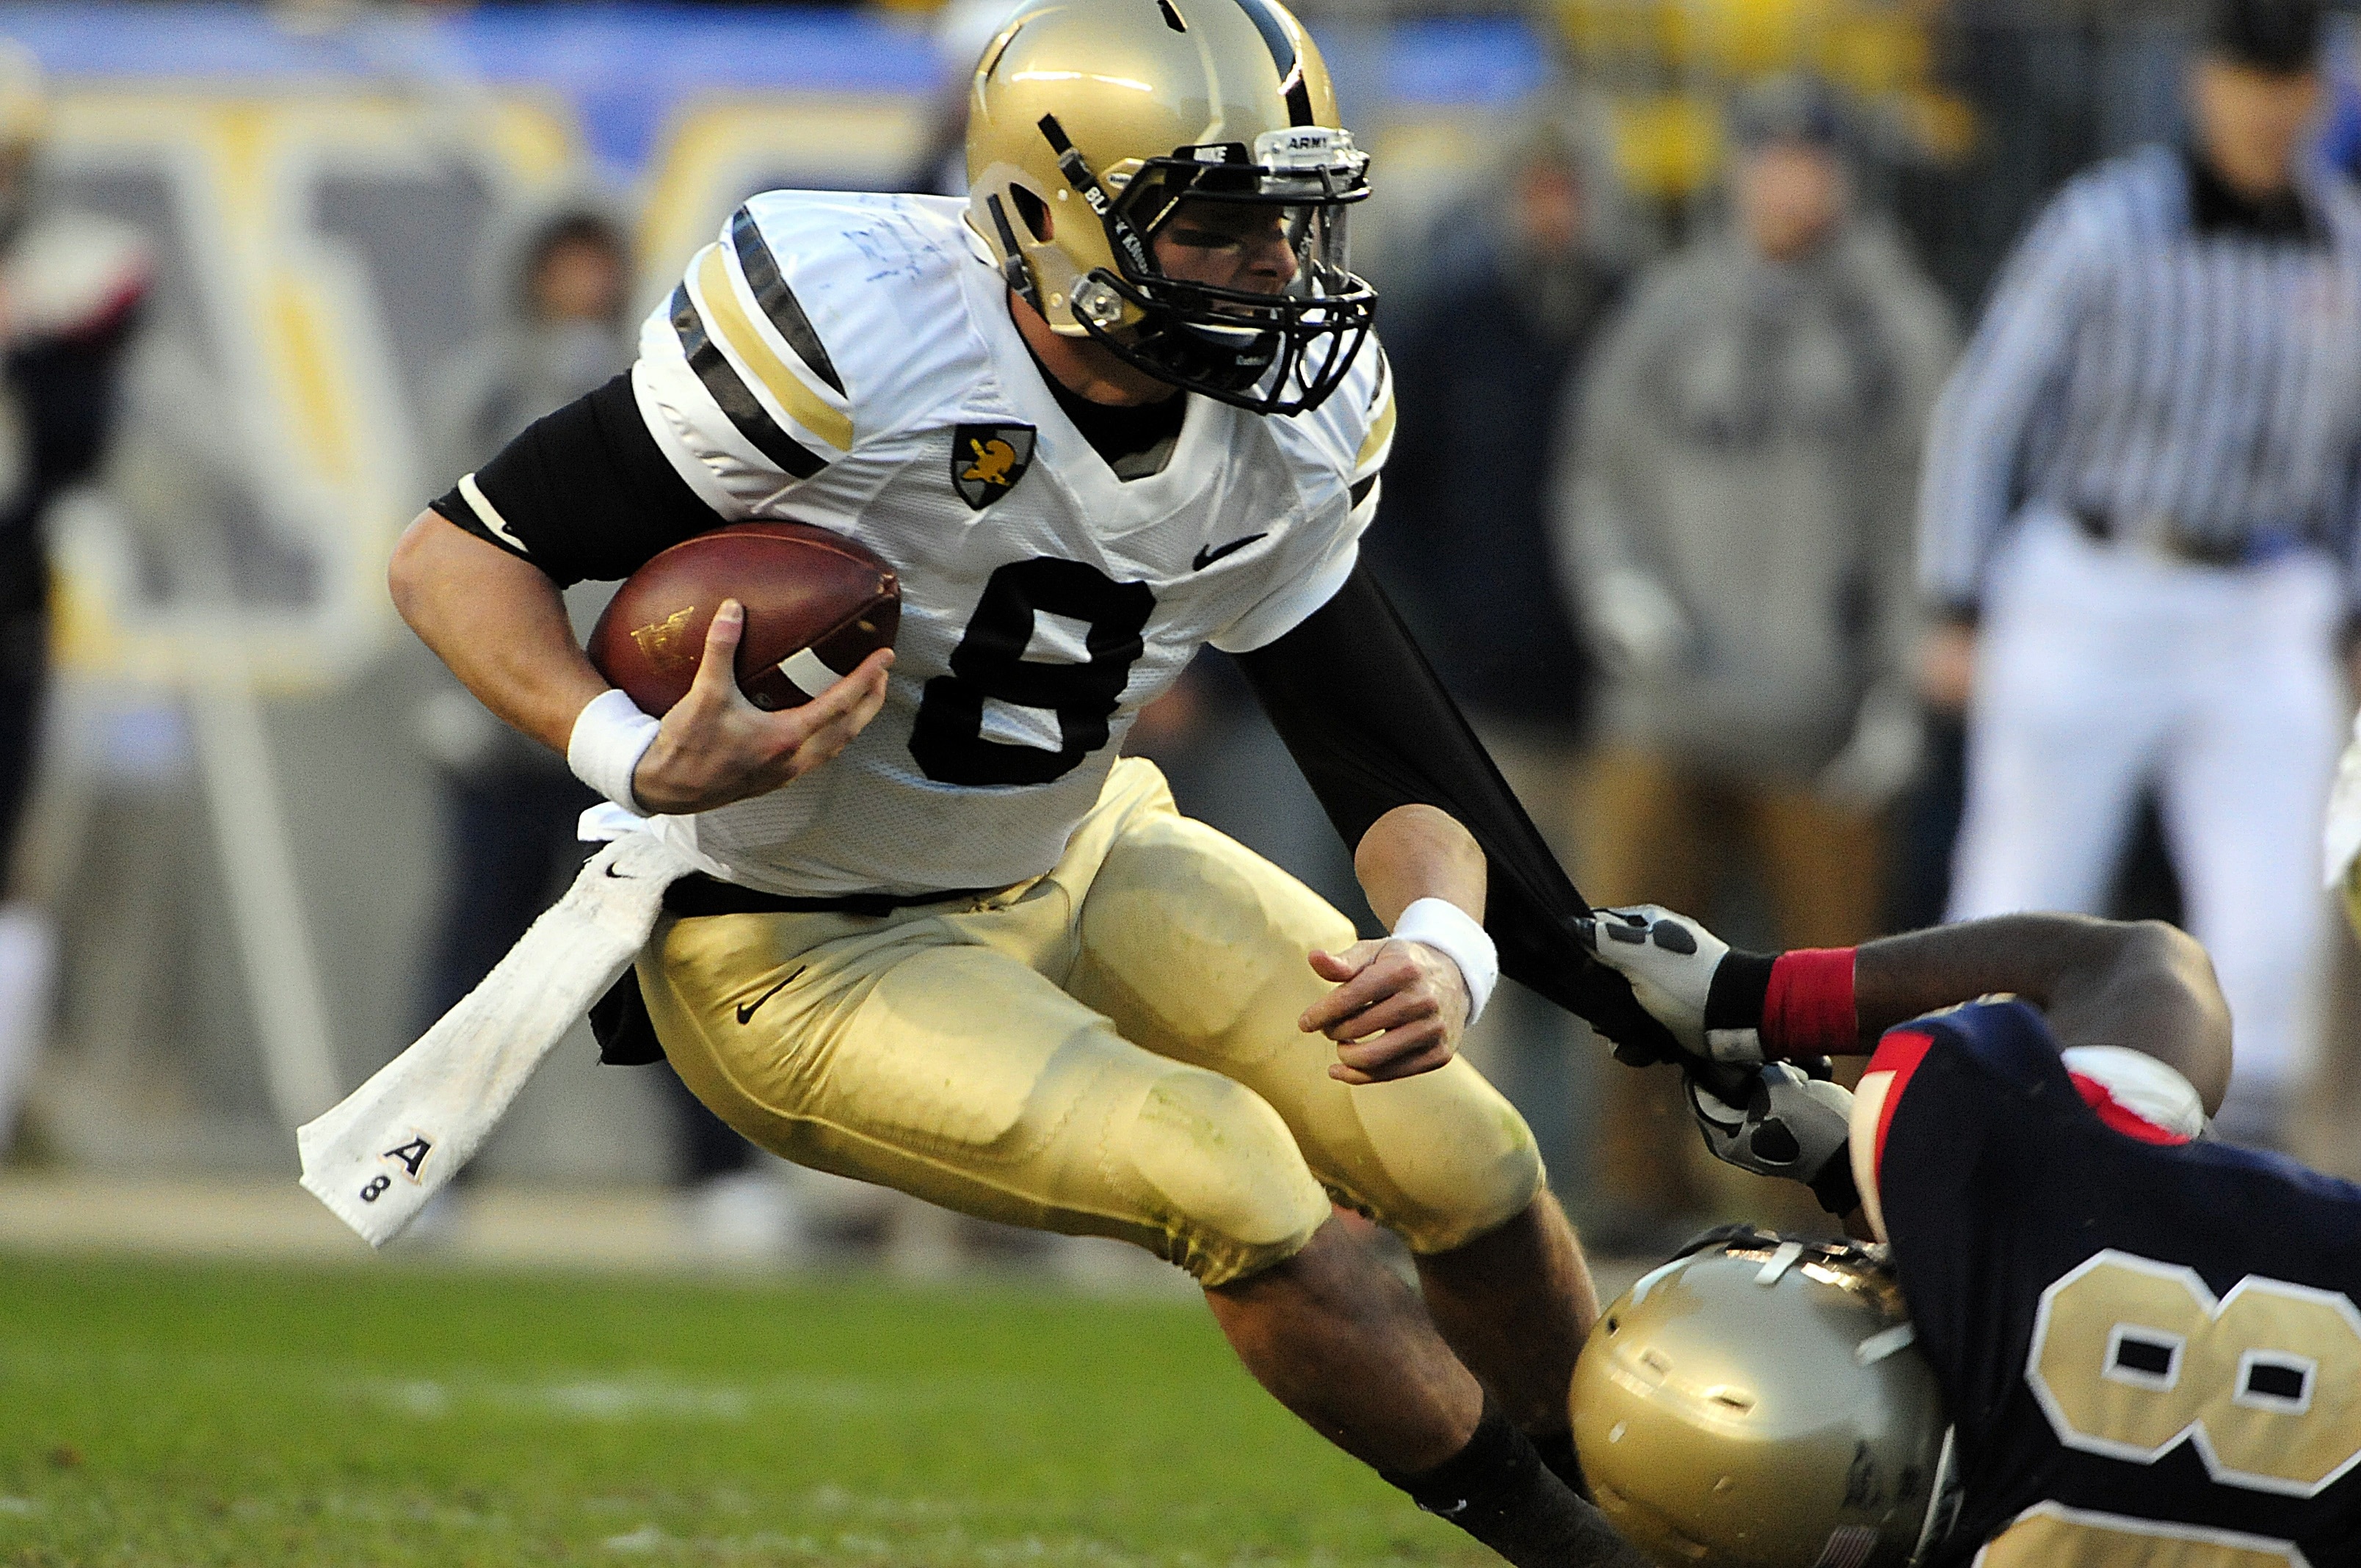 football player in complete football gear holding a football while dodging an opponent